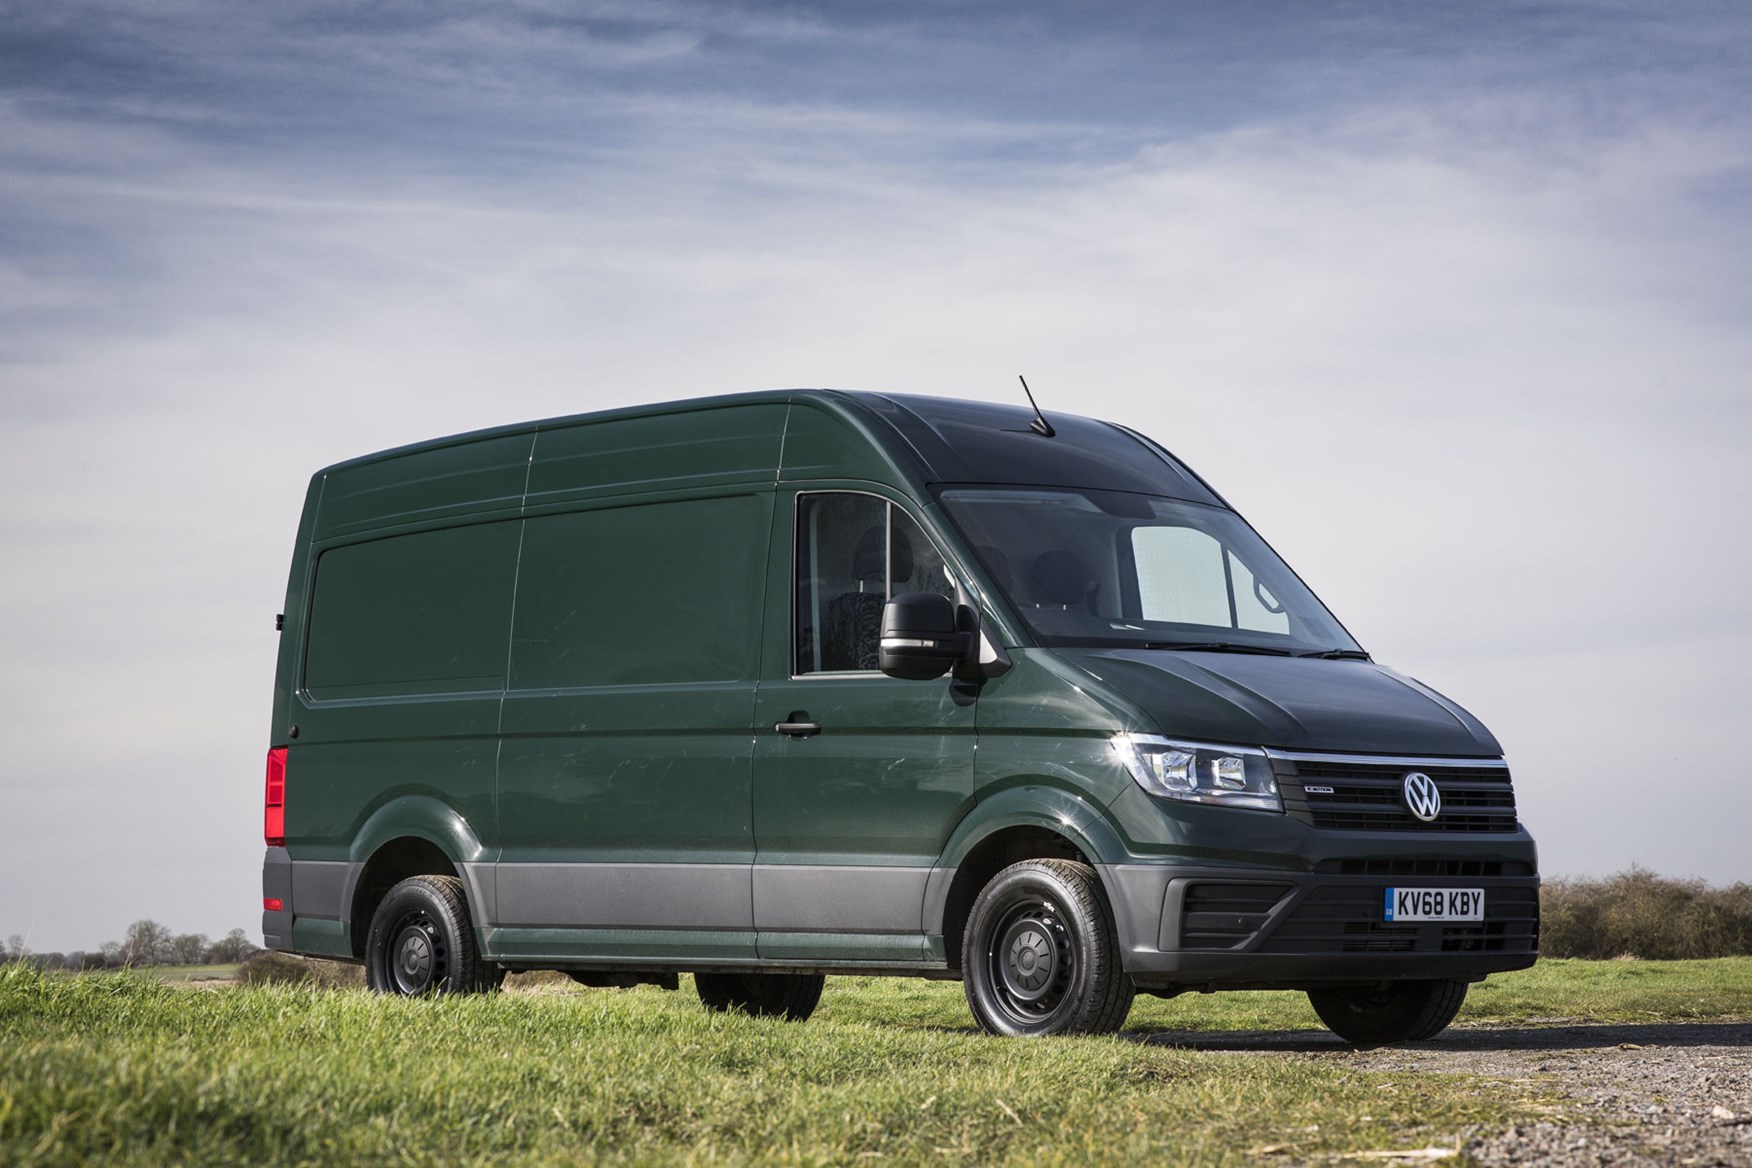 VW Crafter 4Motion review - Ontario Green, front view